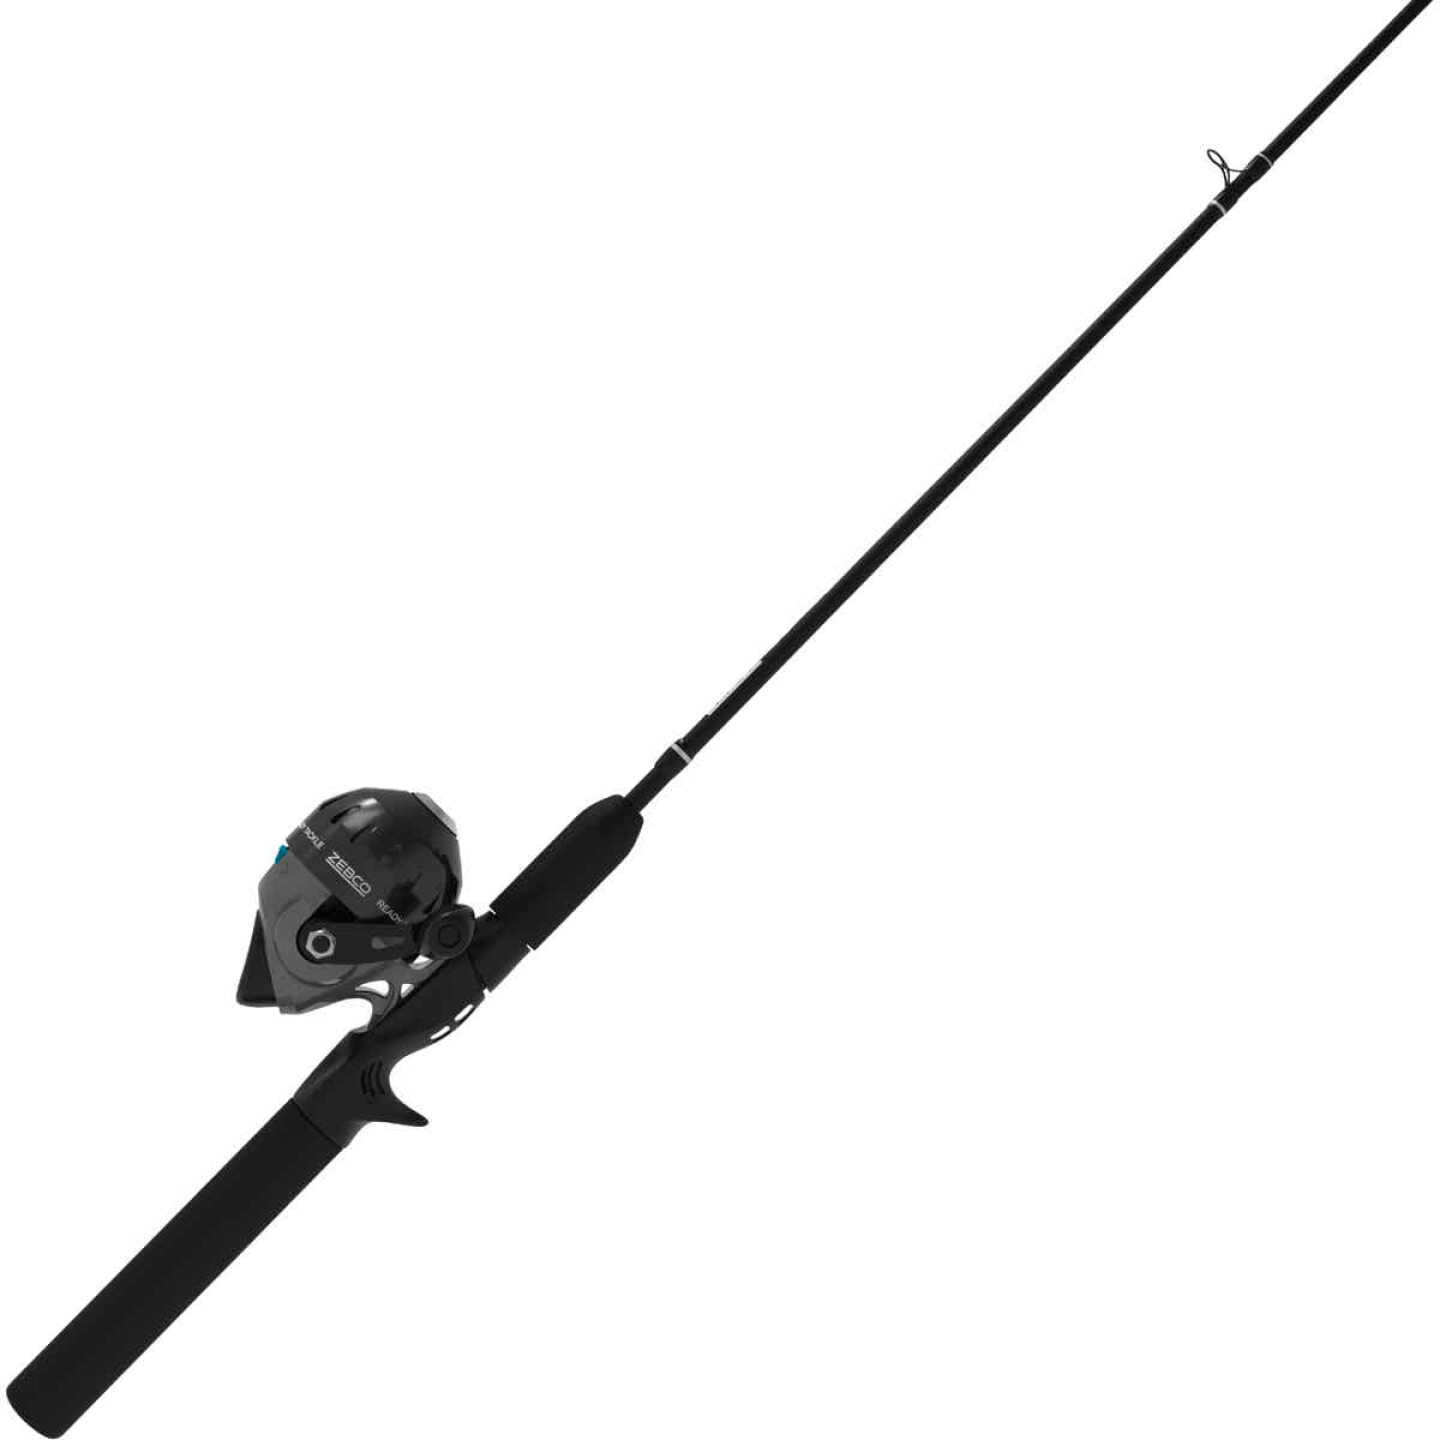  Zebco Ready Tackle Spinning Reel and Telescopic Fishing Rod  Combo, 17-Inch to 5-Foot 6-Inch Telescopic Fishing Pole, Size 20 Fishing  Reel, Pre-Spooled 8-Pound Fishing Line, 53-Piece Tackle Kit,Black : Sports